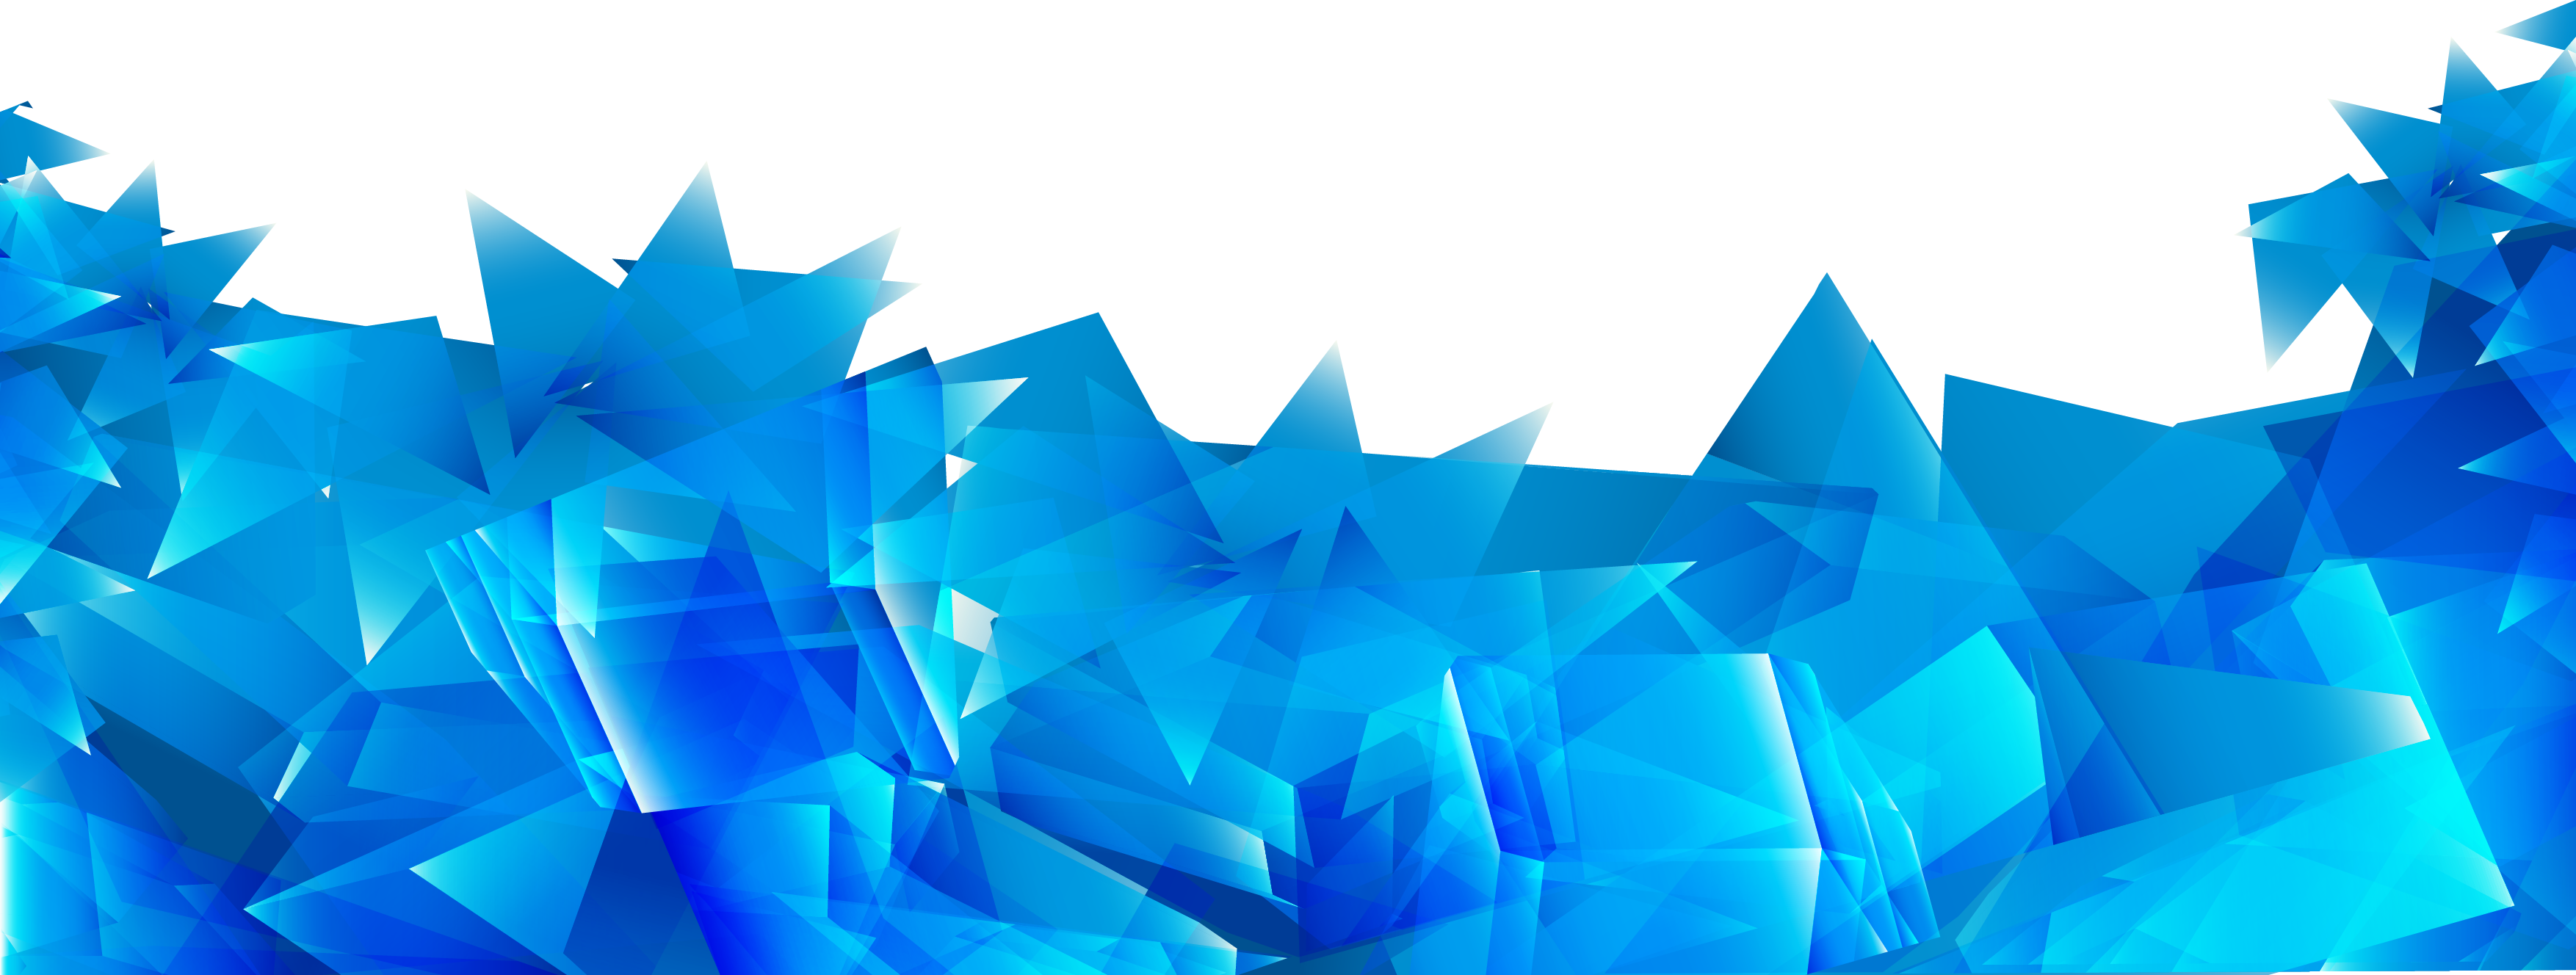 Download PNG image - Blue Abstract Texture PNG Clipart 